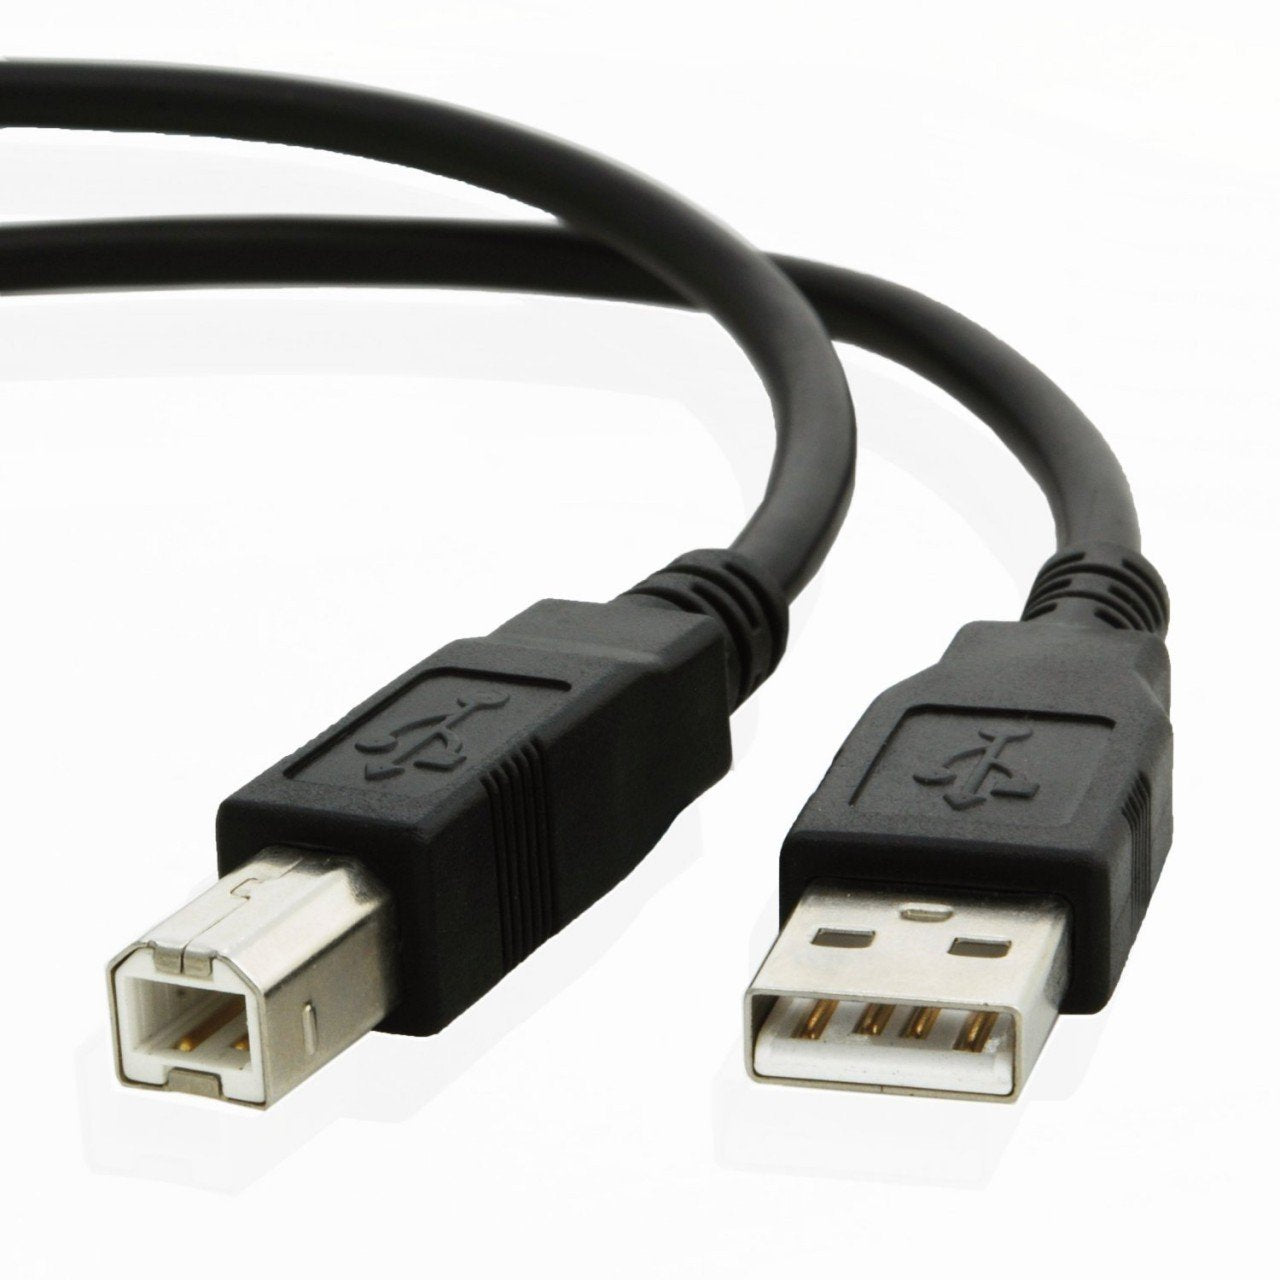 USB cable for Canon PIXMA TS9120